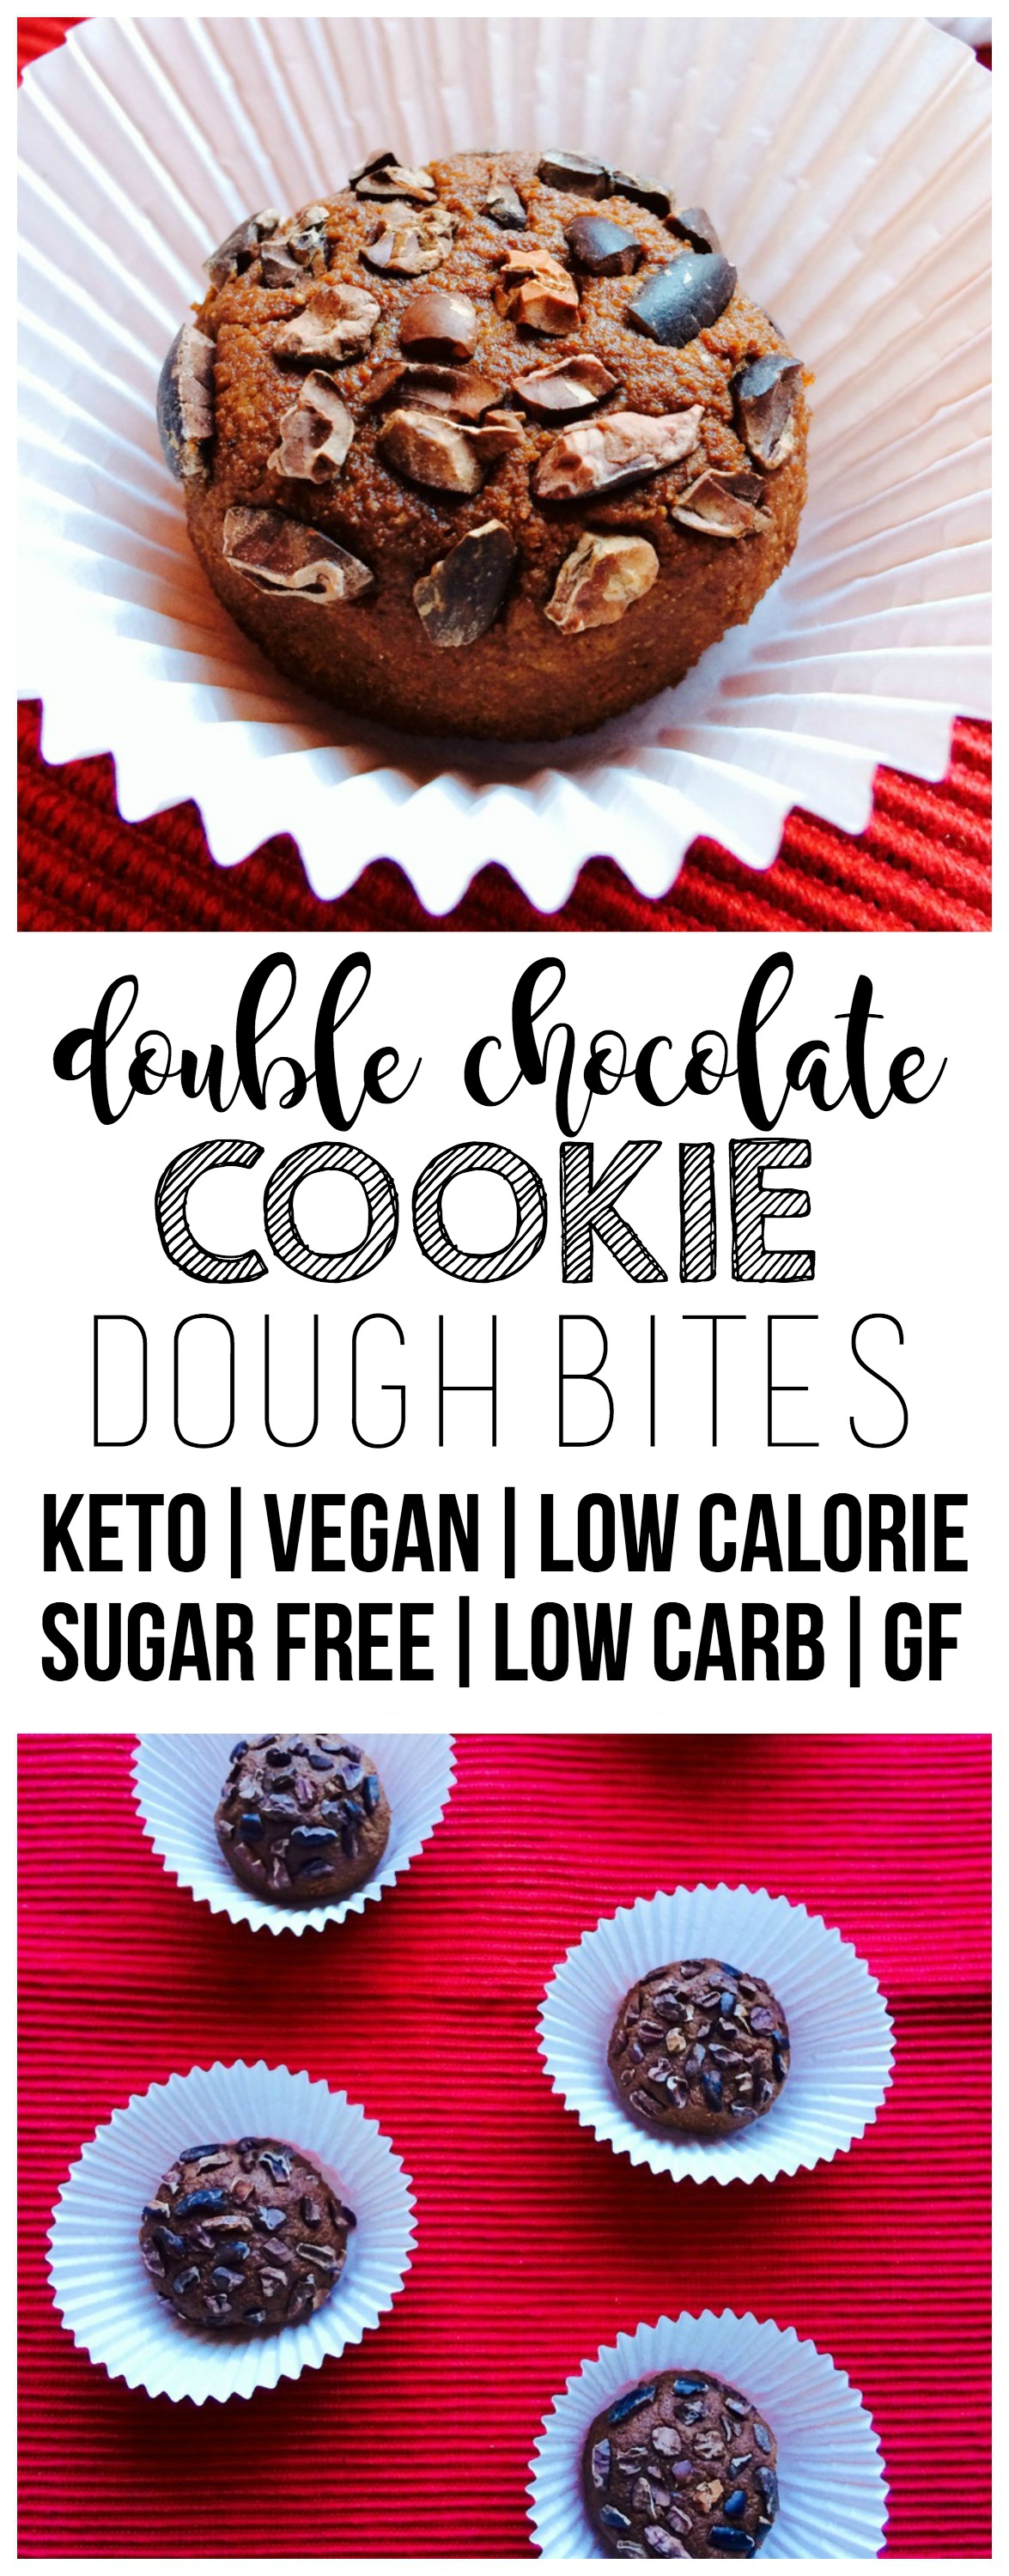 These Keto Double Chocolate Cookie Dough Bites are the perfect, guilt-free treat! Vegan, gluten-free, sugar-free, low-carb, oil-free, paleo, and low-calorie - only 72 calories each!